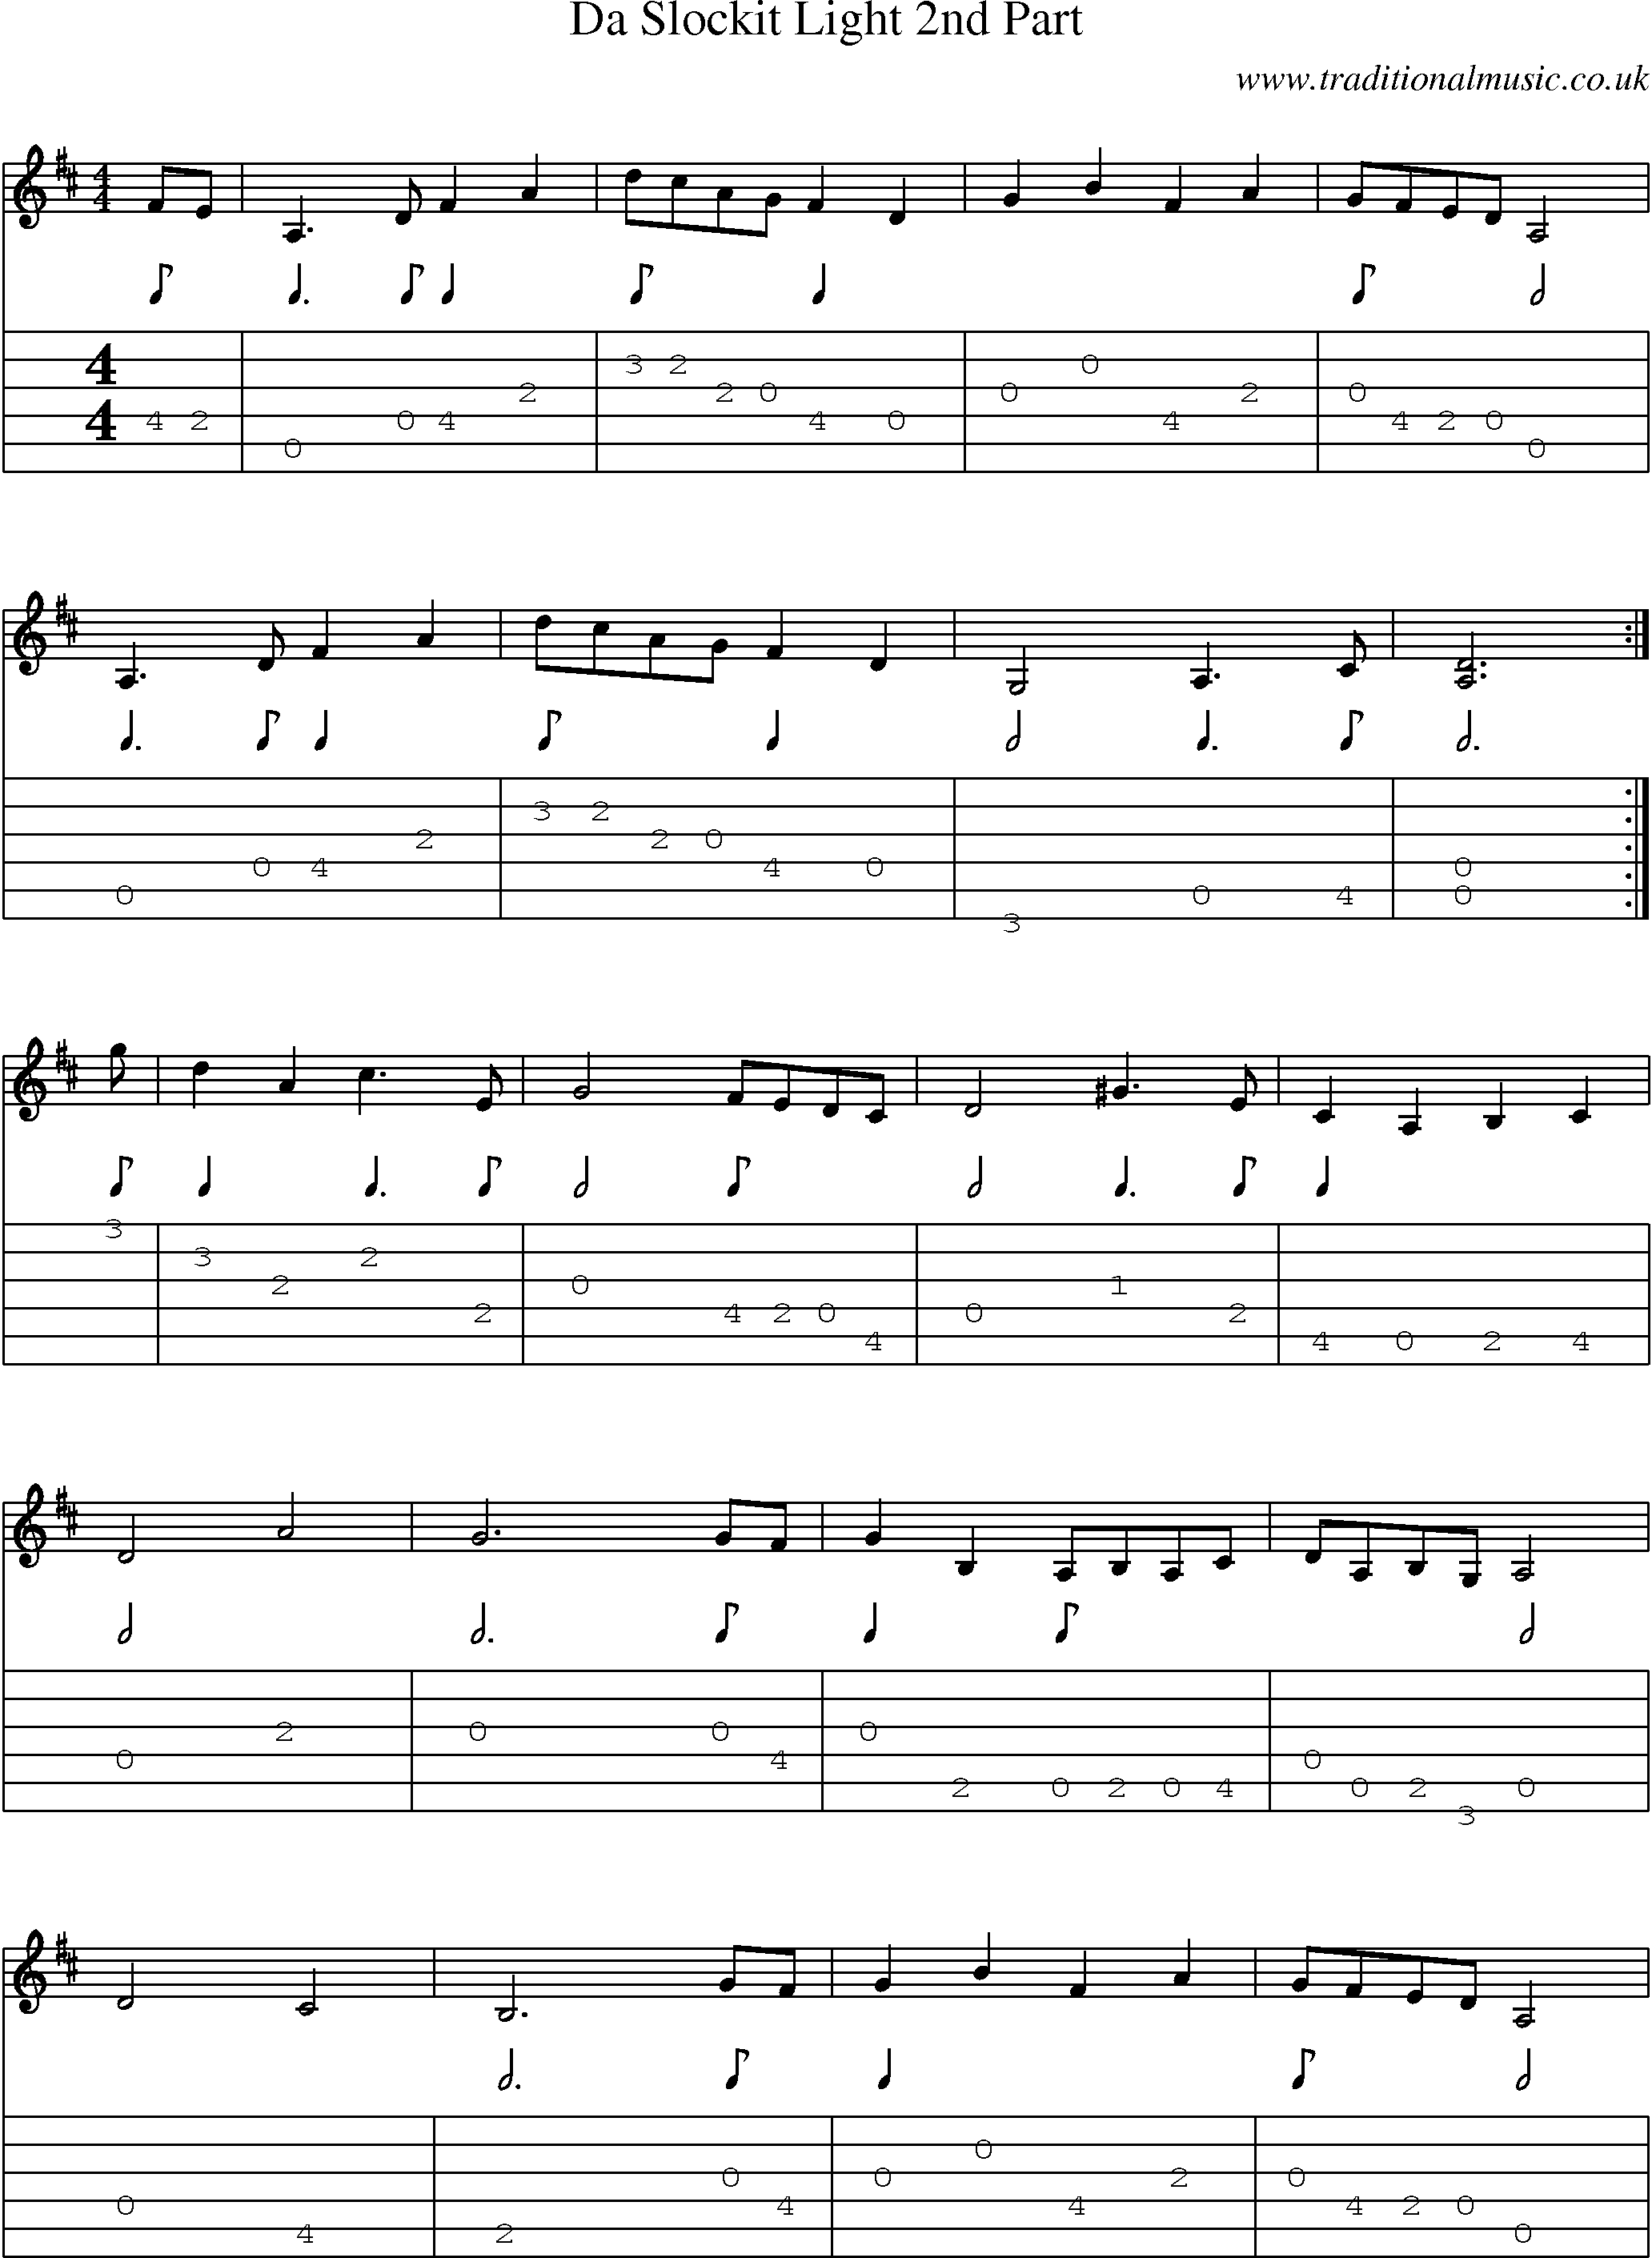 Music Score and Guitar Tabs for Da Slockit Light 2nd Part